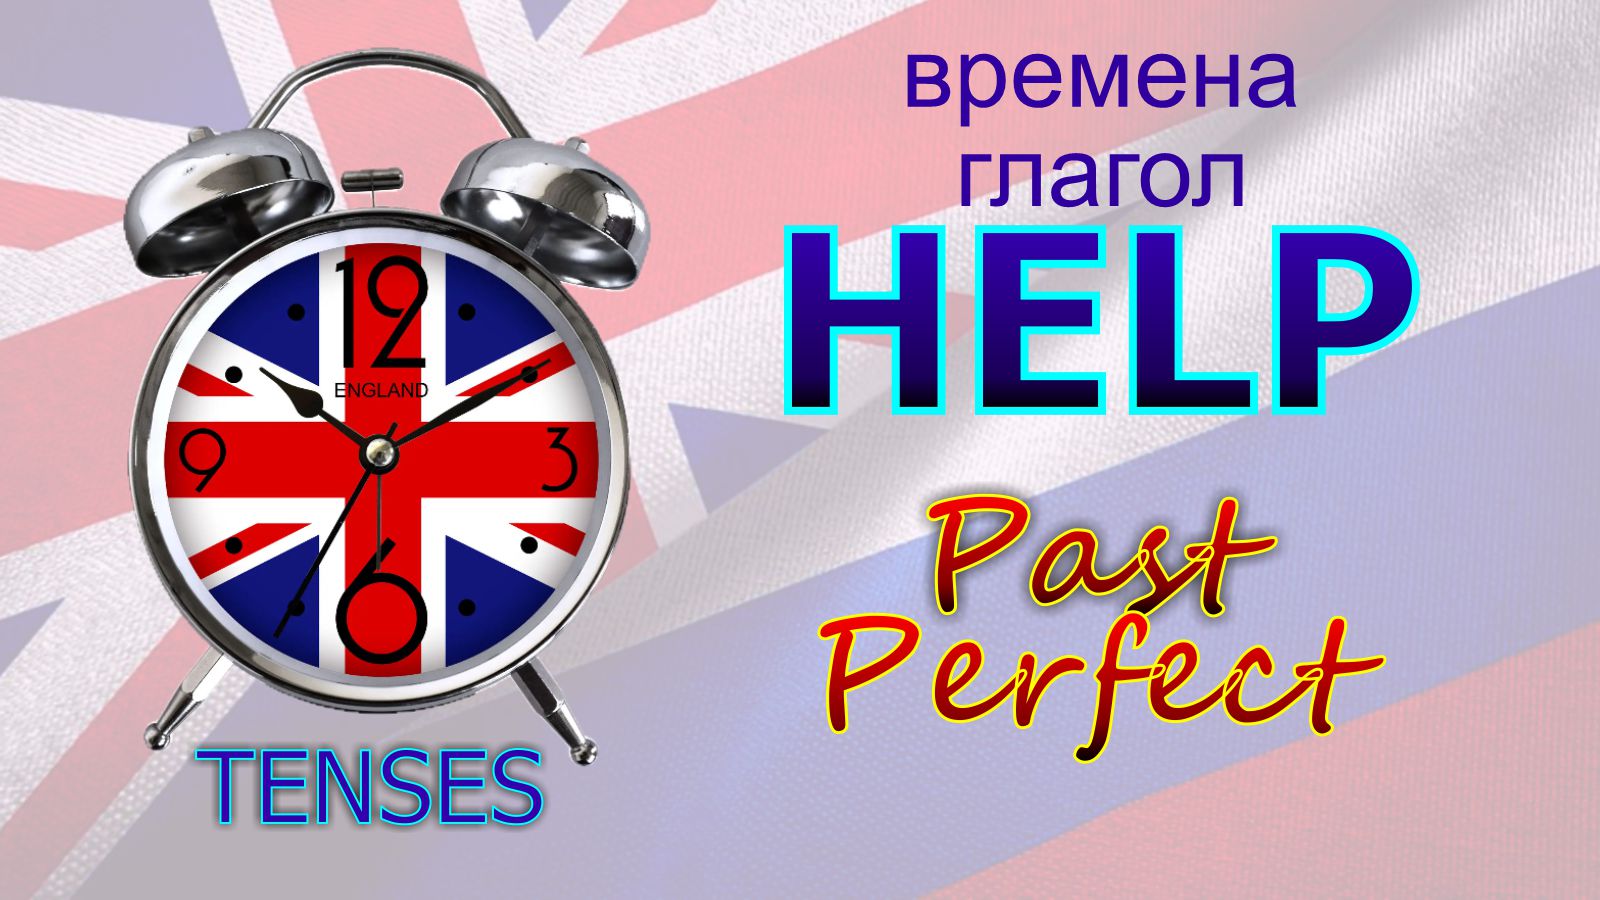 Времена. Глагол to HELP. Past Perfect